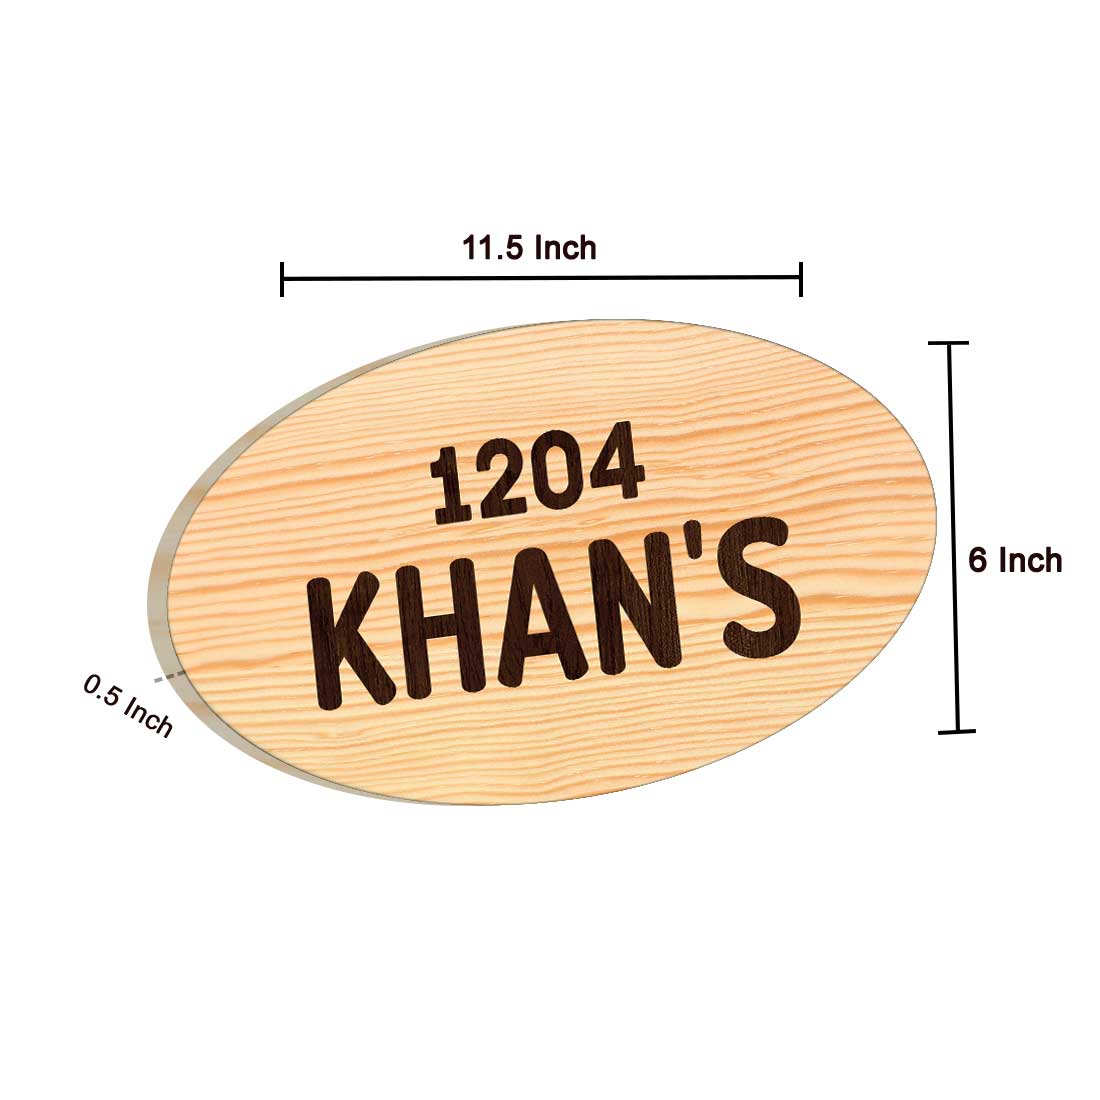 Wooden Personalised Name Plate for Home Custom Door Sign